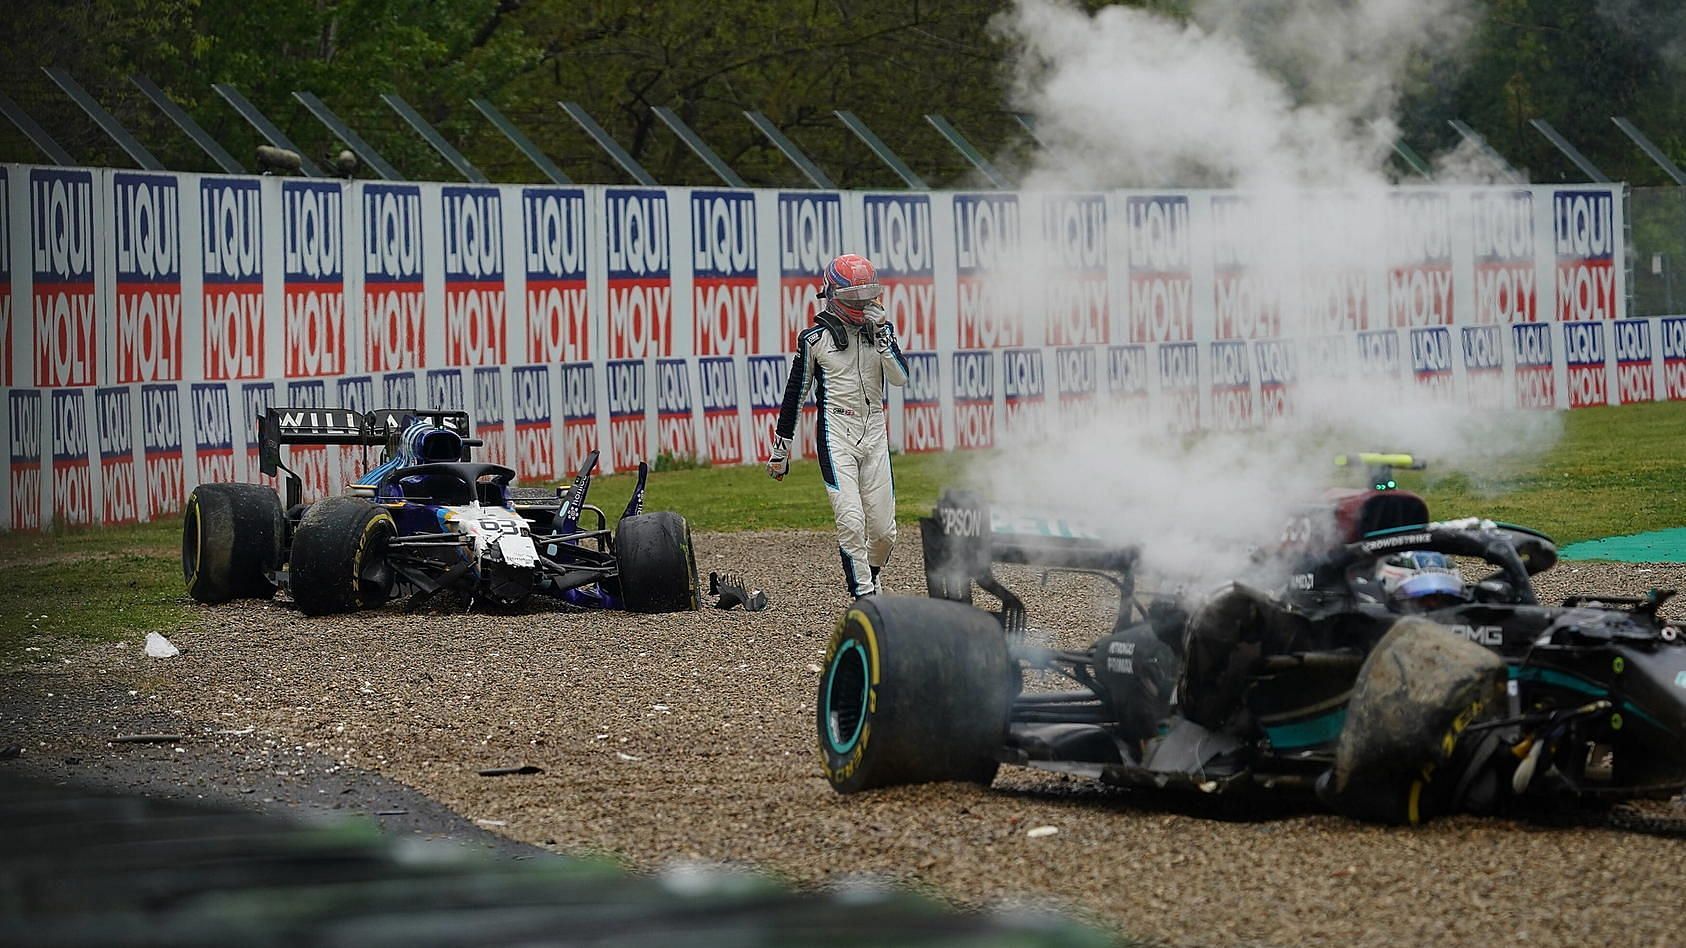 George Russell walking out of his car after crashing with Valtteri Bottas during the Emilia Romagna Grand Prix, 2021 (Image Credits: Reddit/u/Phil20122)